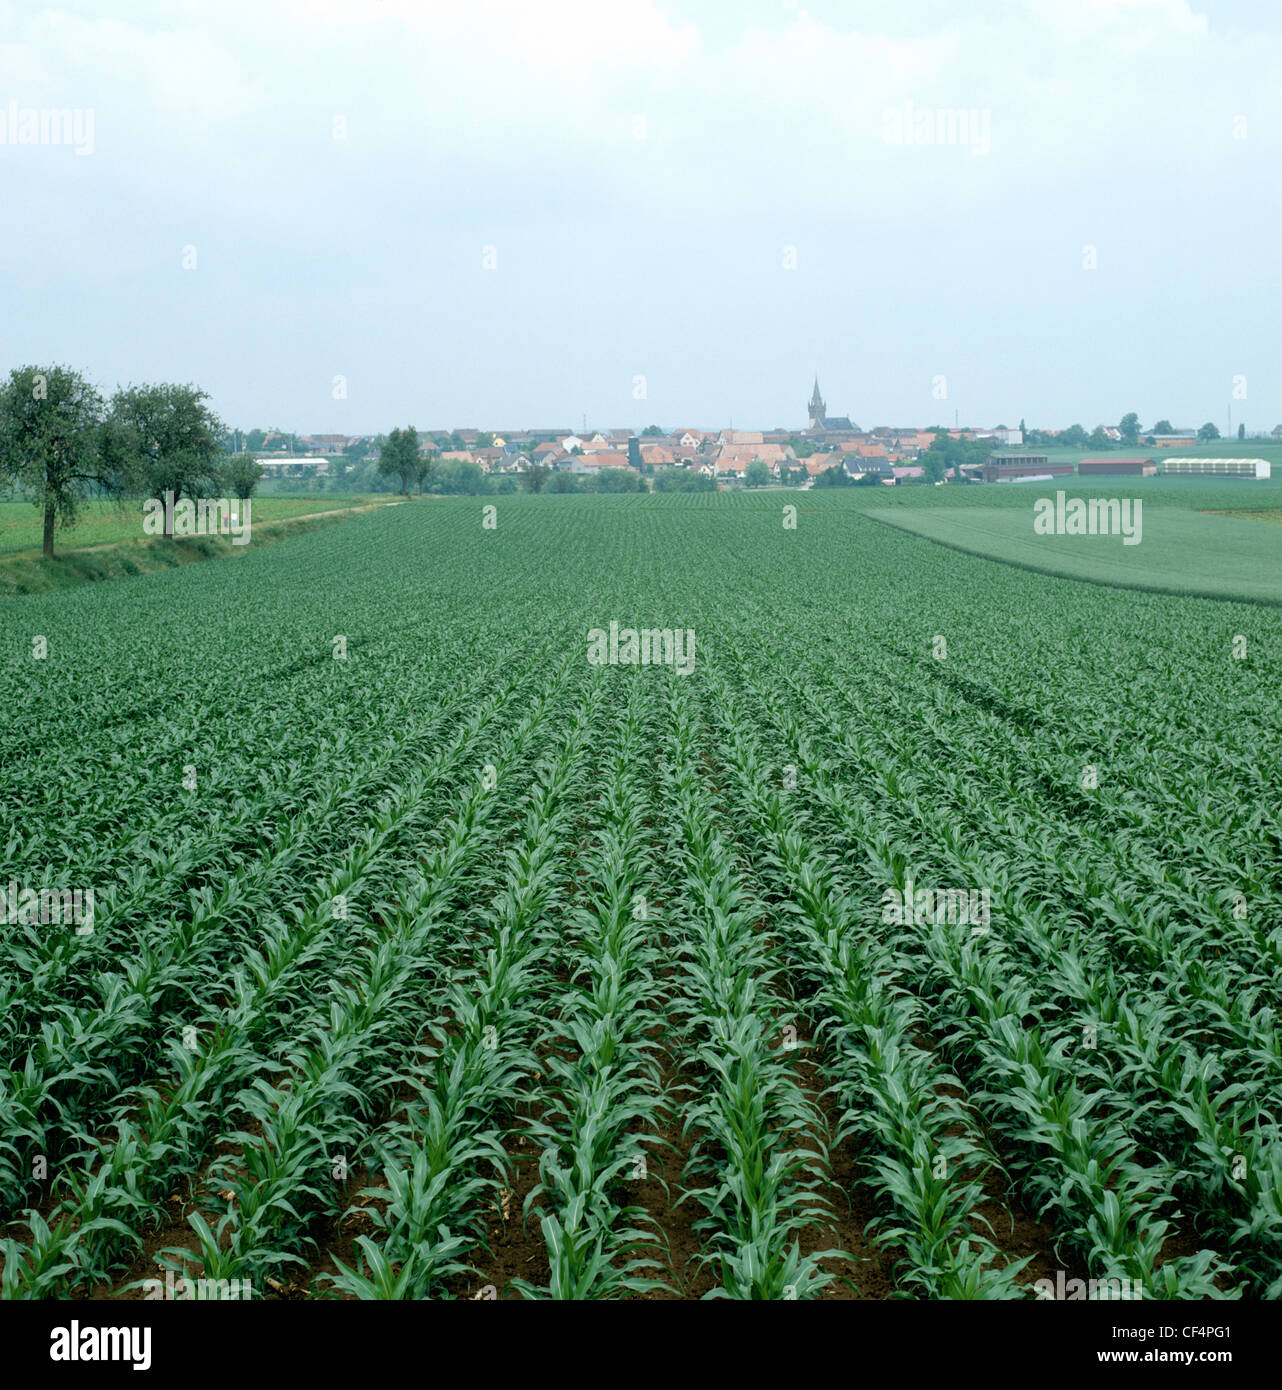 View of even young healthy maize crop with a small town behind in Alsace, France Stock Photo